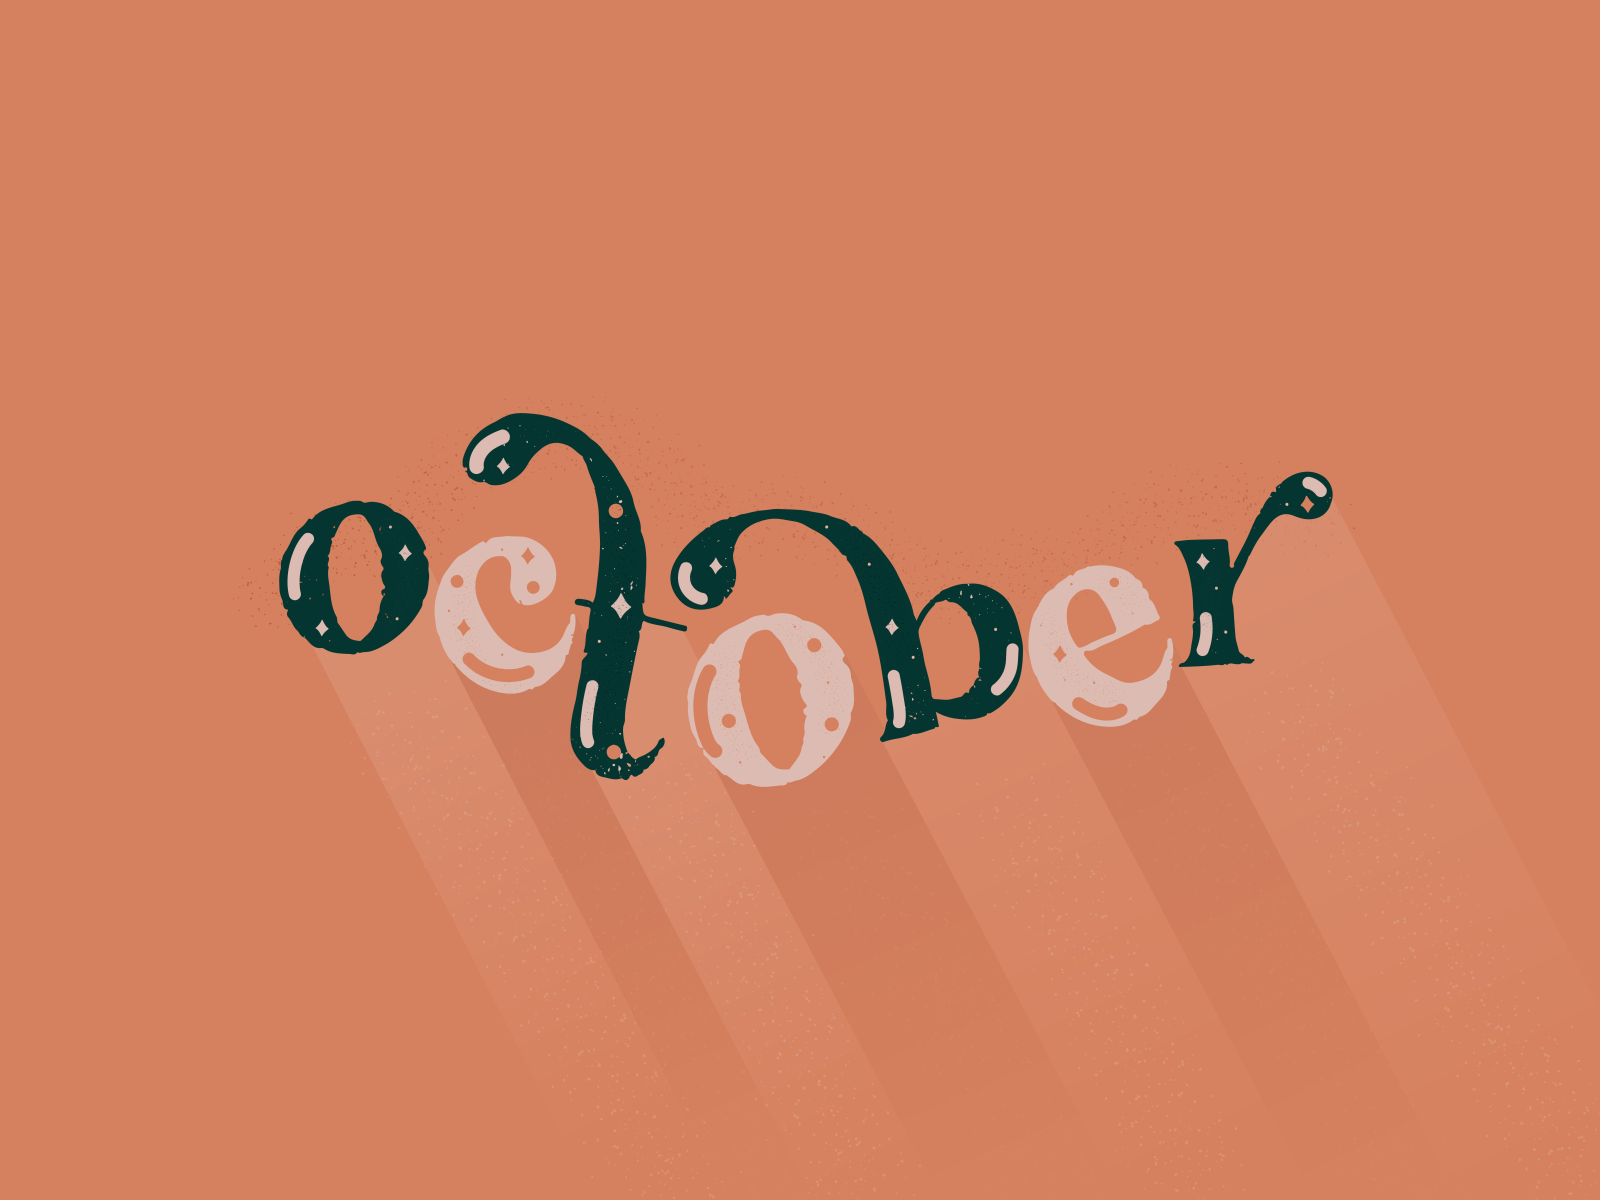 October Type by Lea LaConia on Dribbble